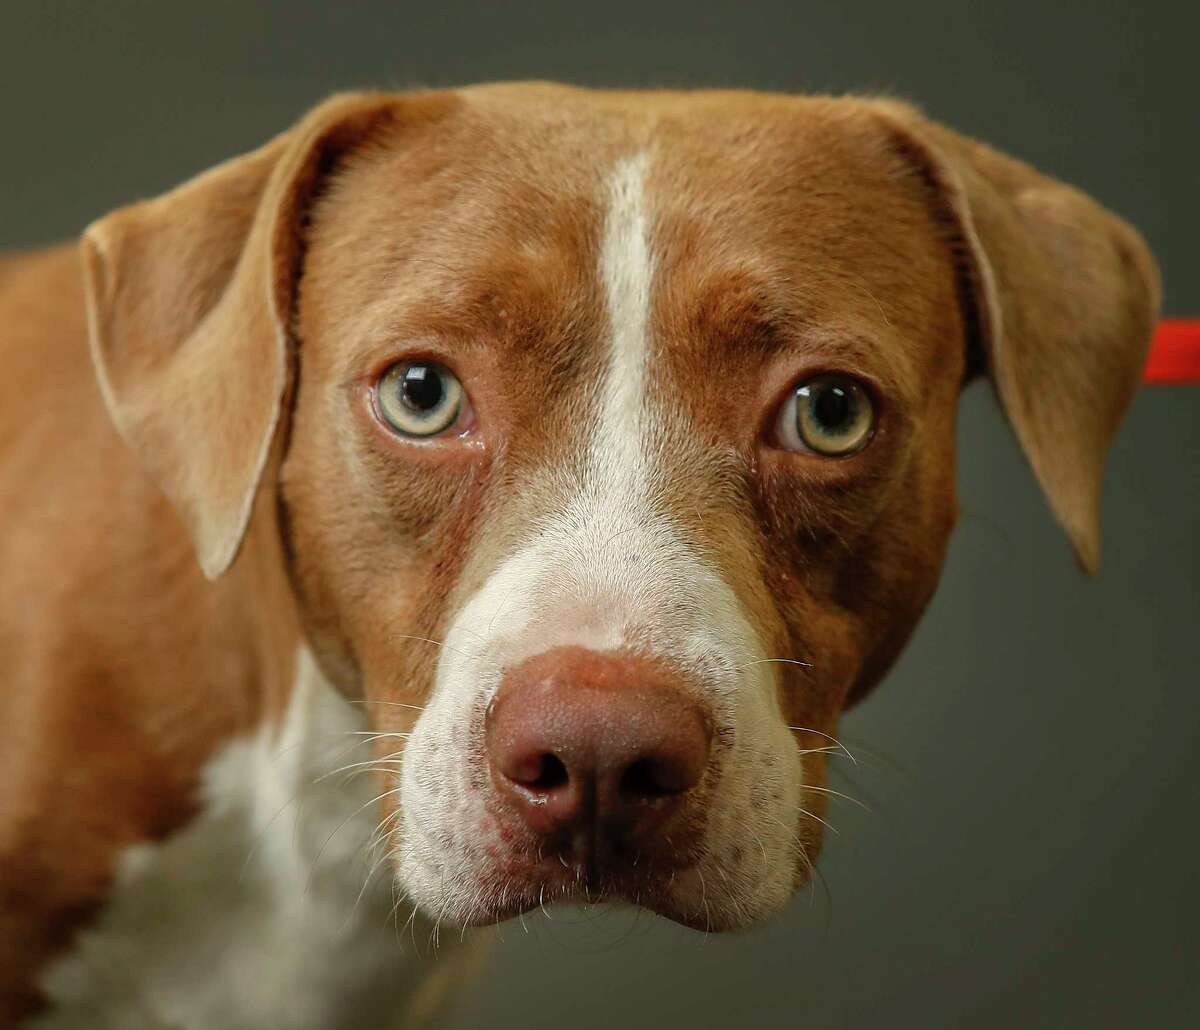 Texas is a 1-year-old, male, American Staffordshire mix available for adoption at the Harris County Animal Shelter, in Houston. (Animal ID: A534329) Photographed Tuesday June 4, 2019. Texas is very timid, he does not understand why he is in the shelter. He was surrendered by his owner because there were too many animals in the home.